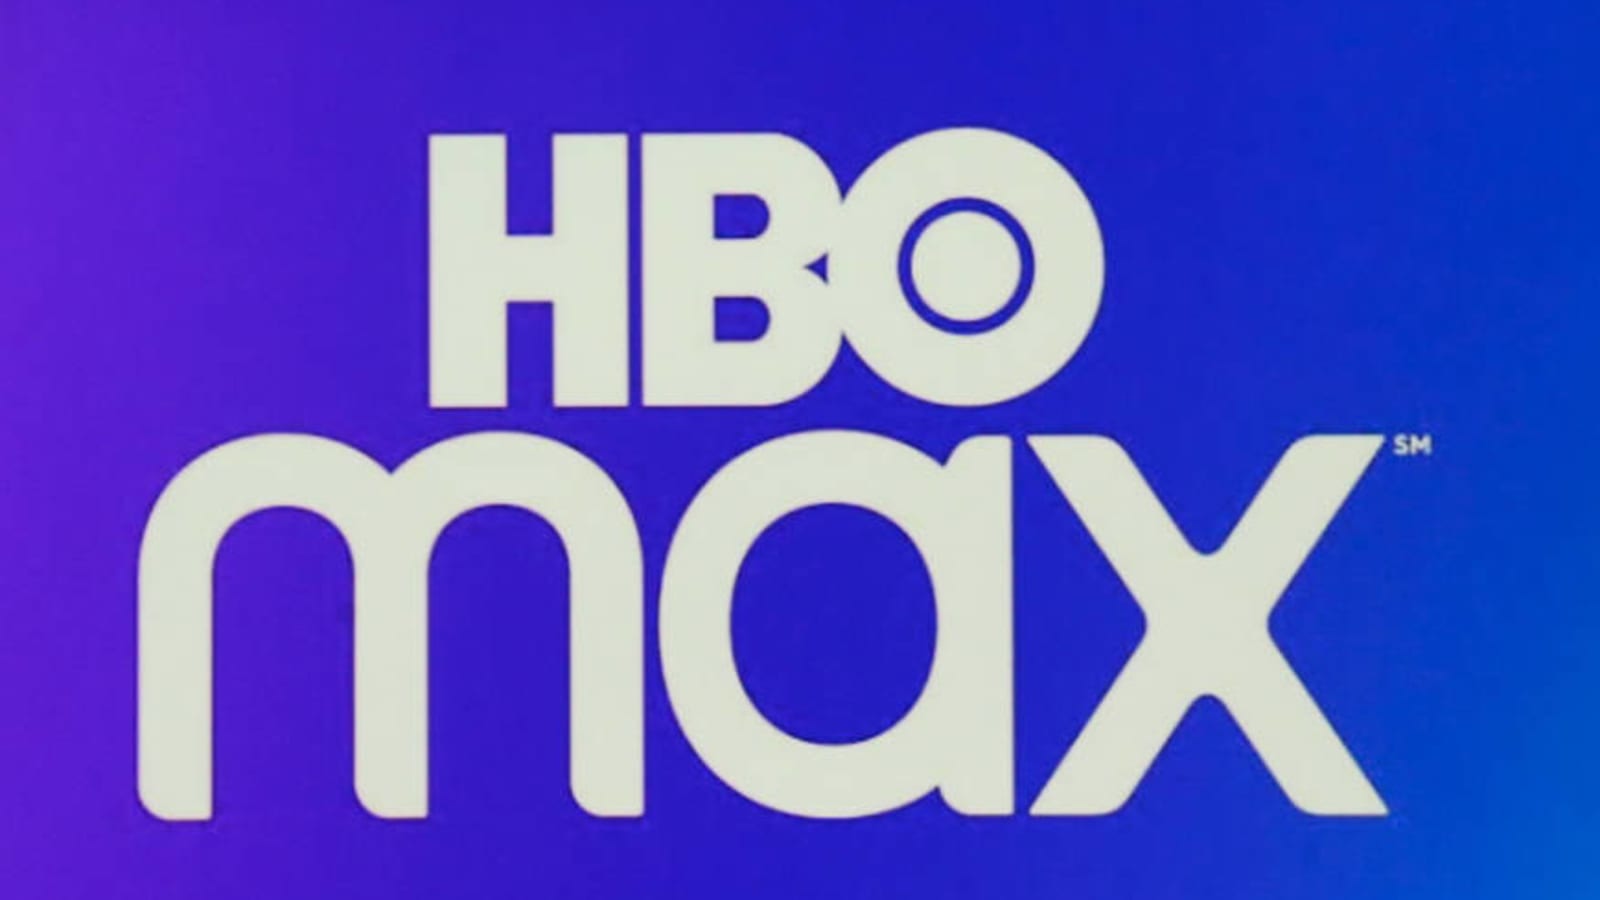 The 25 movies or TV shows you should stream first on HBO Max